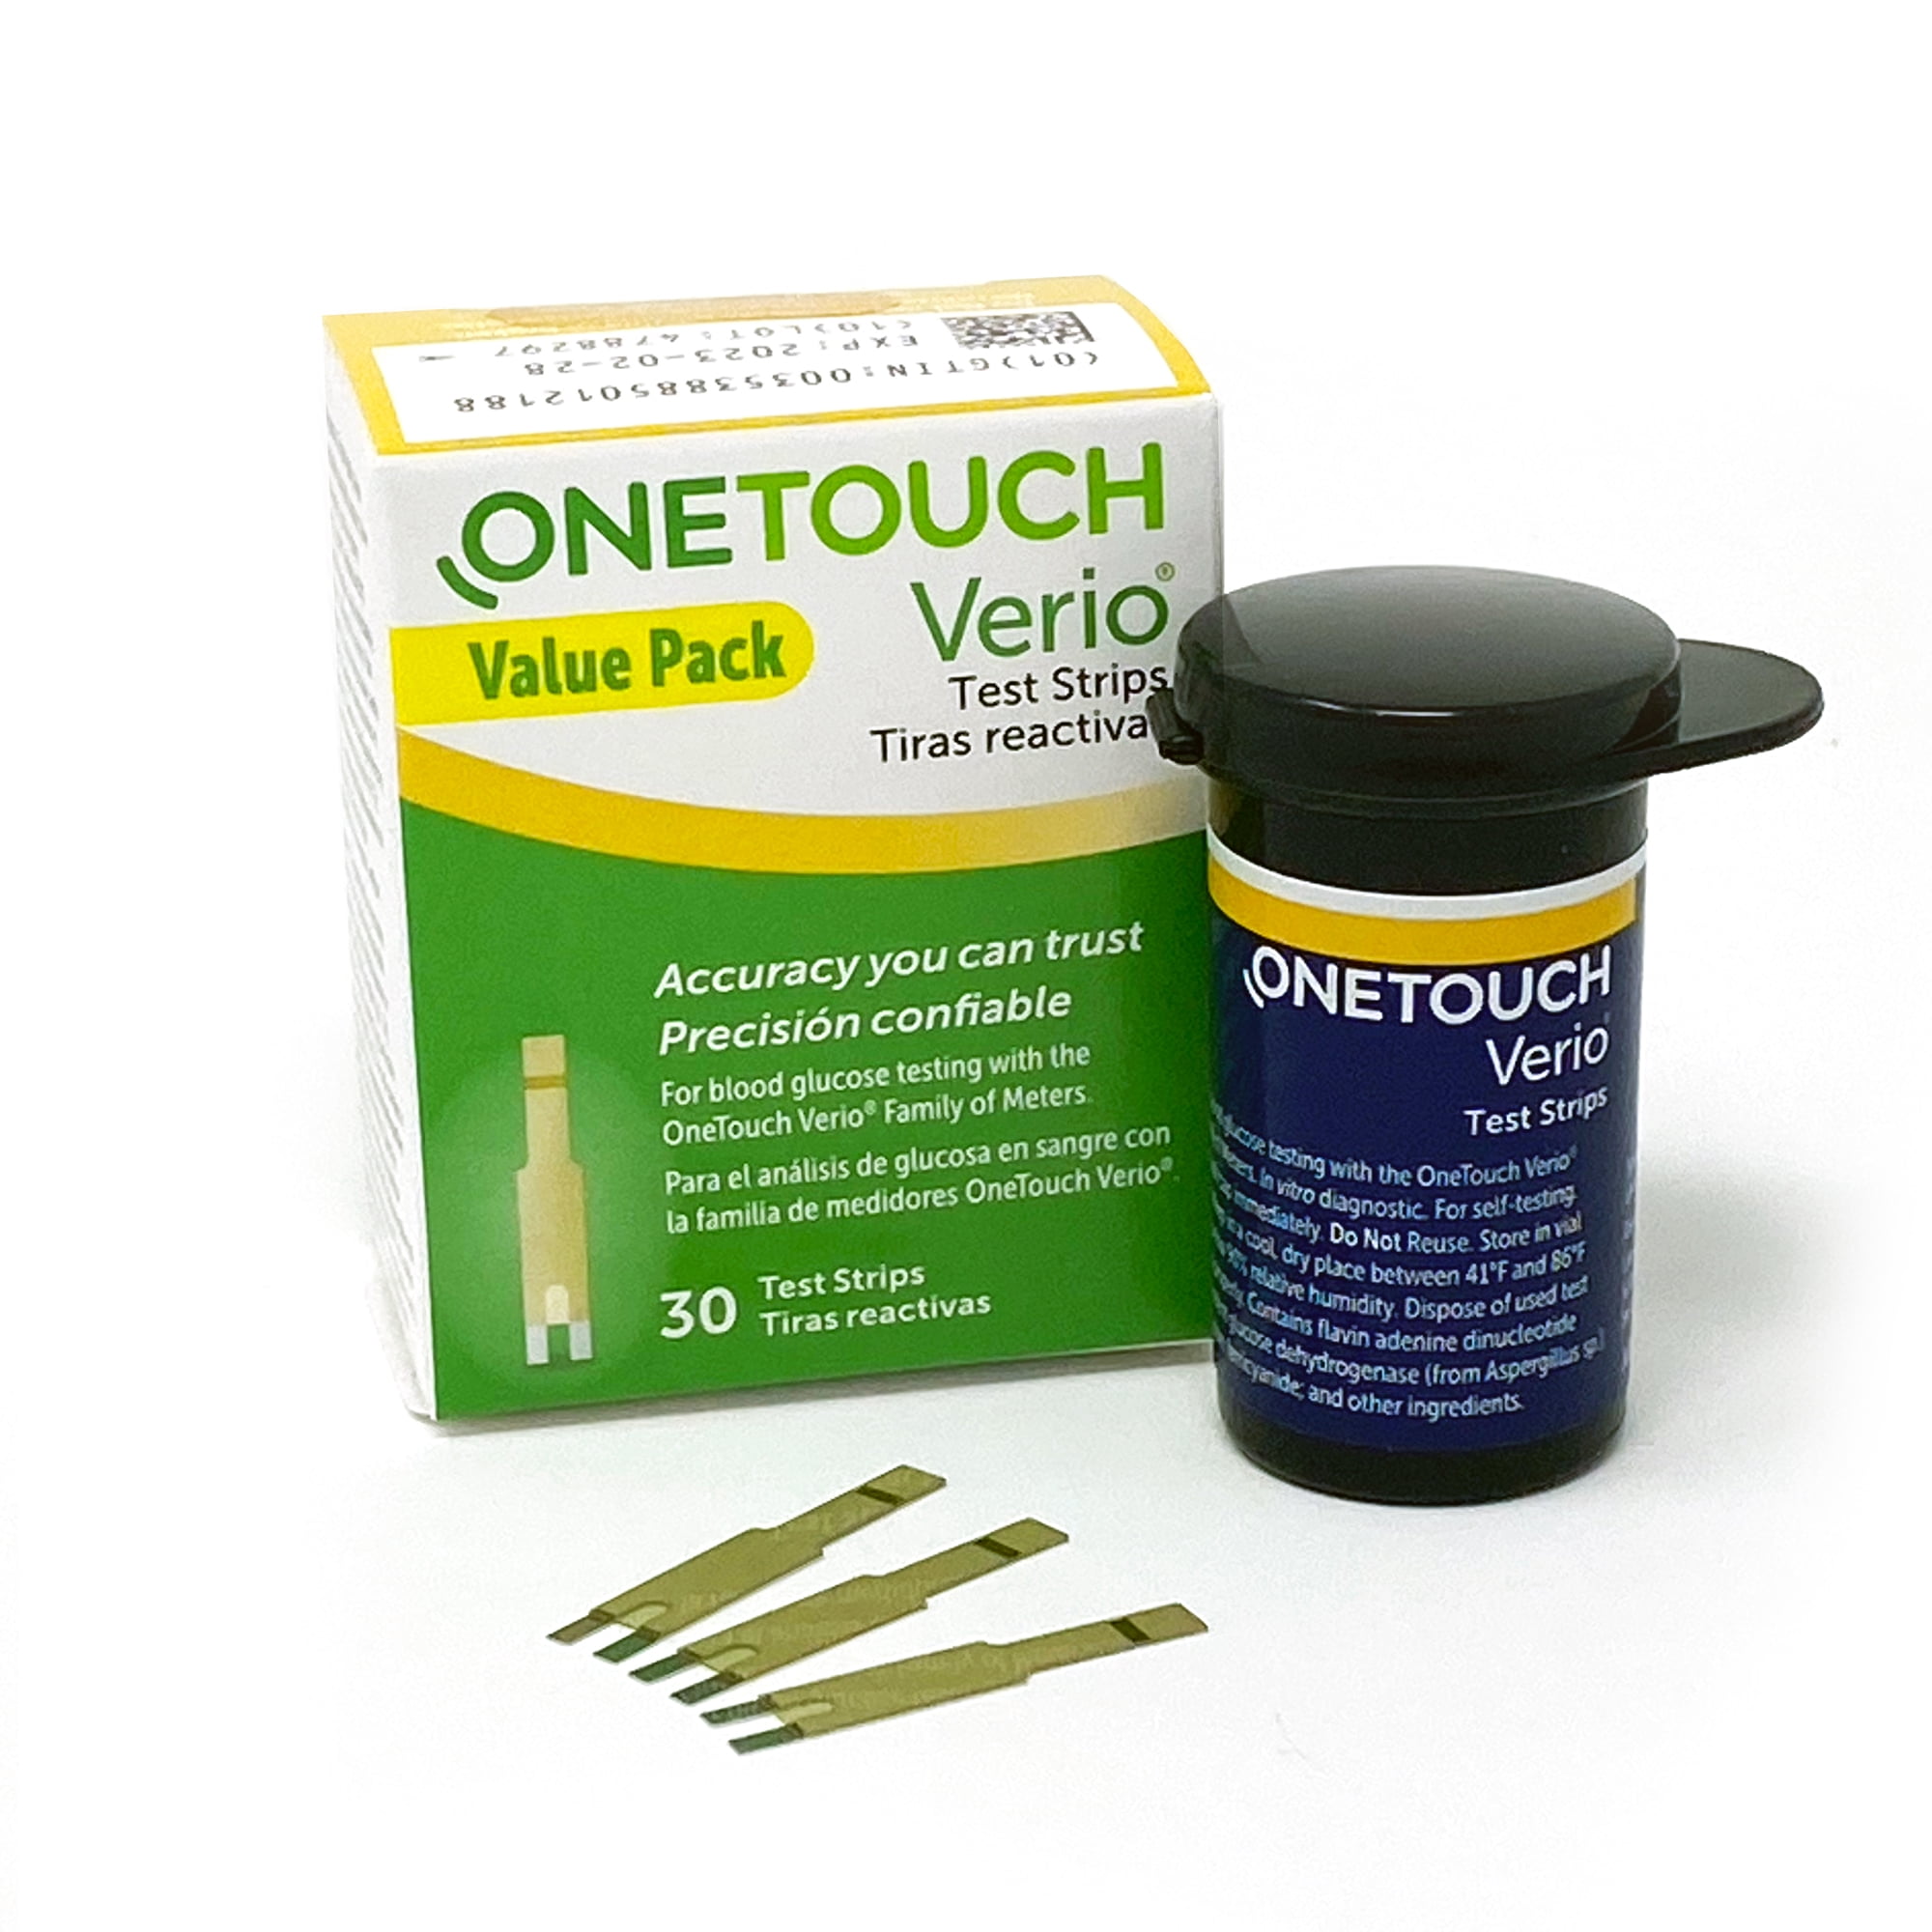 OneTouch Verio Test Strips for Diabetes - 30 Count | Diabetic Test Strips for Blood Sugar Monitor | at Home Self Glucose Monitoring | 1 Box, 30 Test Strips